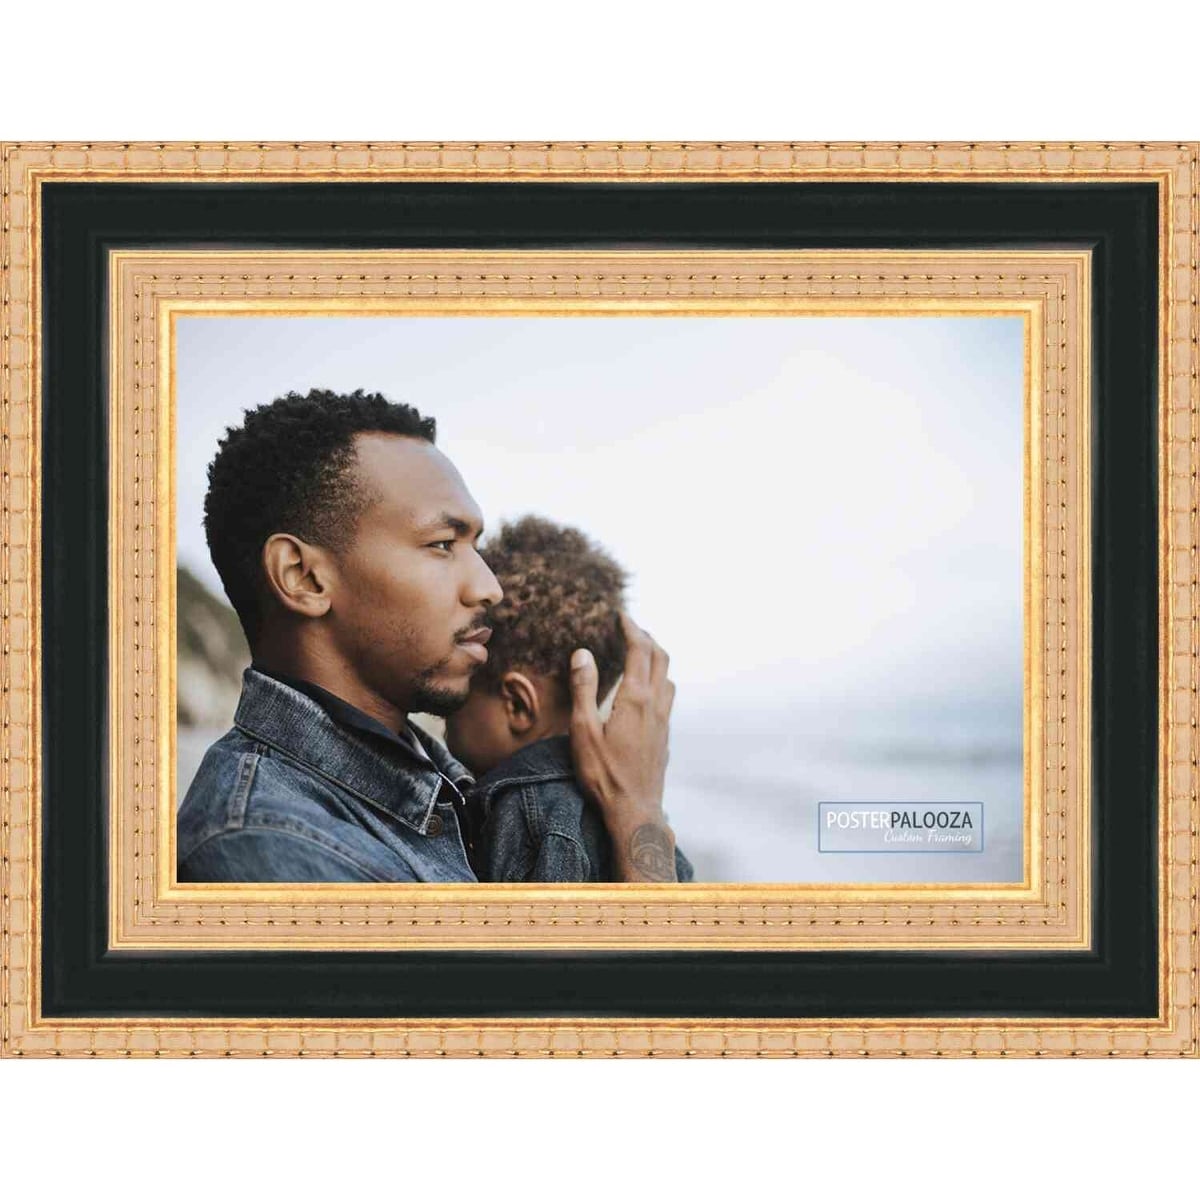 https://ak1.ostkcdn.com/images/products/is/images/direct/0df54ffbb35f6ba76d829a42fac800af8dc50f17/4x7-Traditional-Gold-Complete-Wood-Picture-Frame-with-UV-Acrylic%2C-Foam-Board-Backing%2C-%26-Hardware.jpg